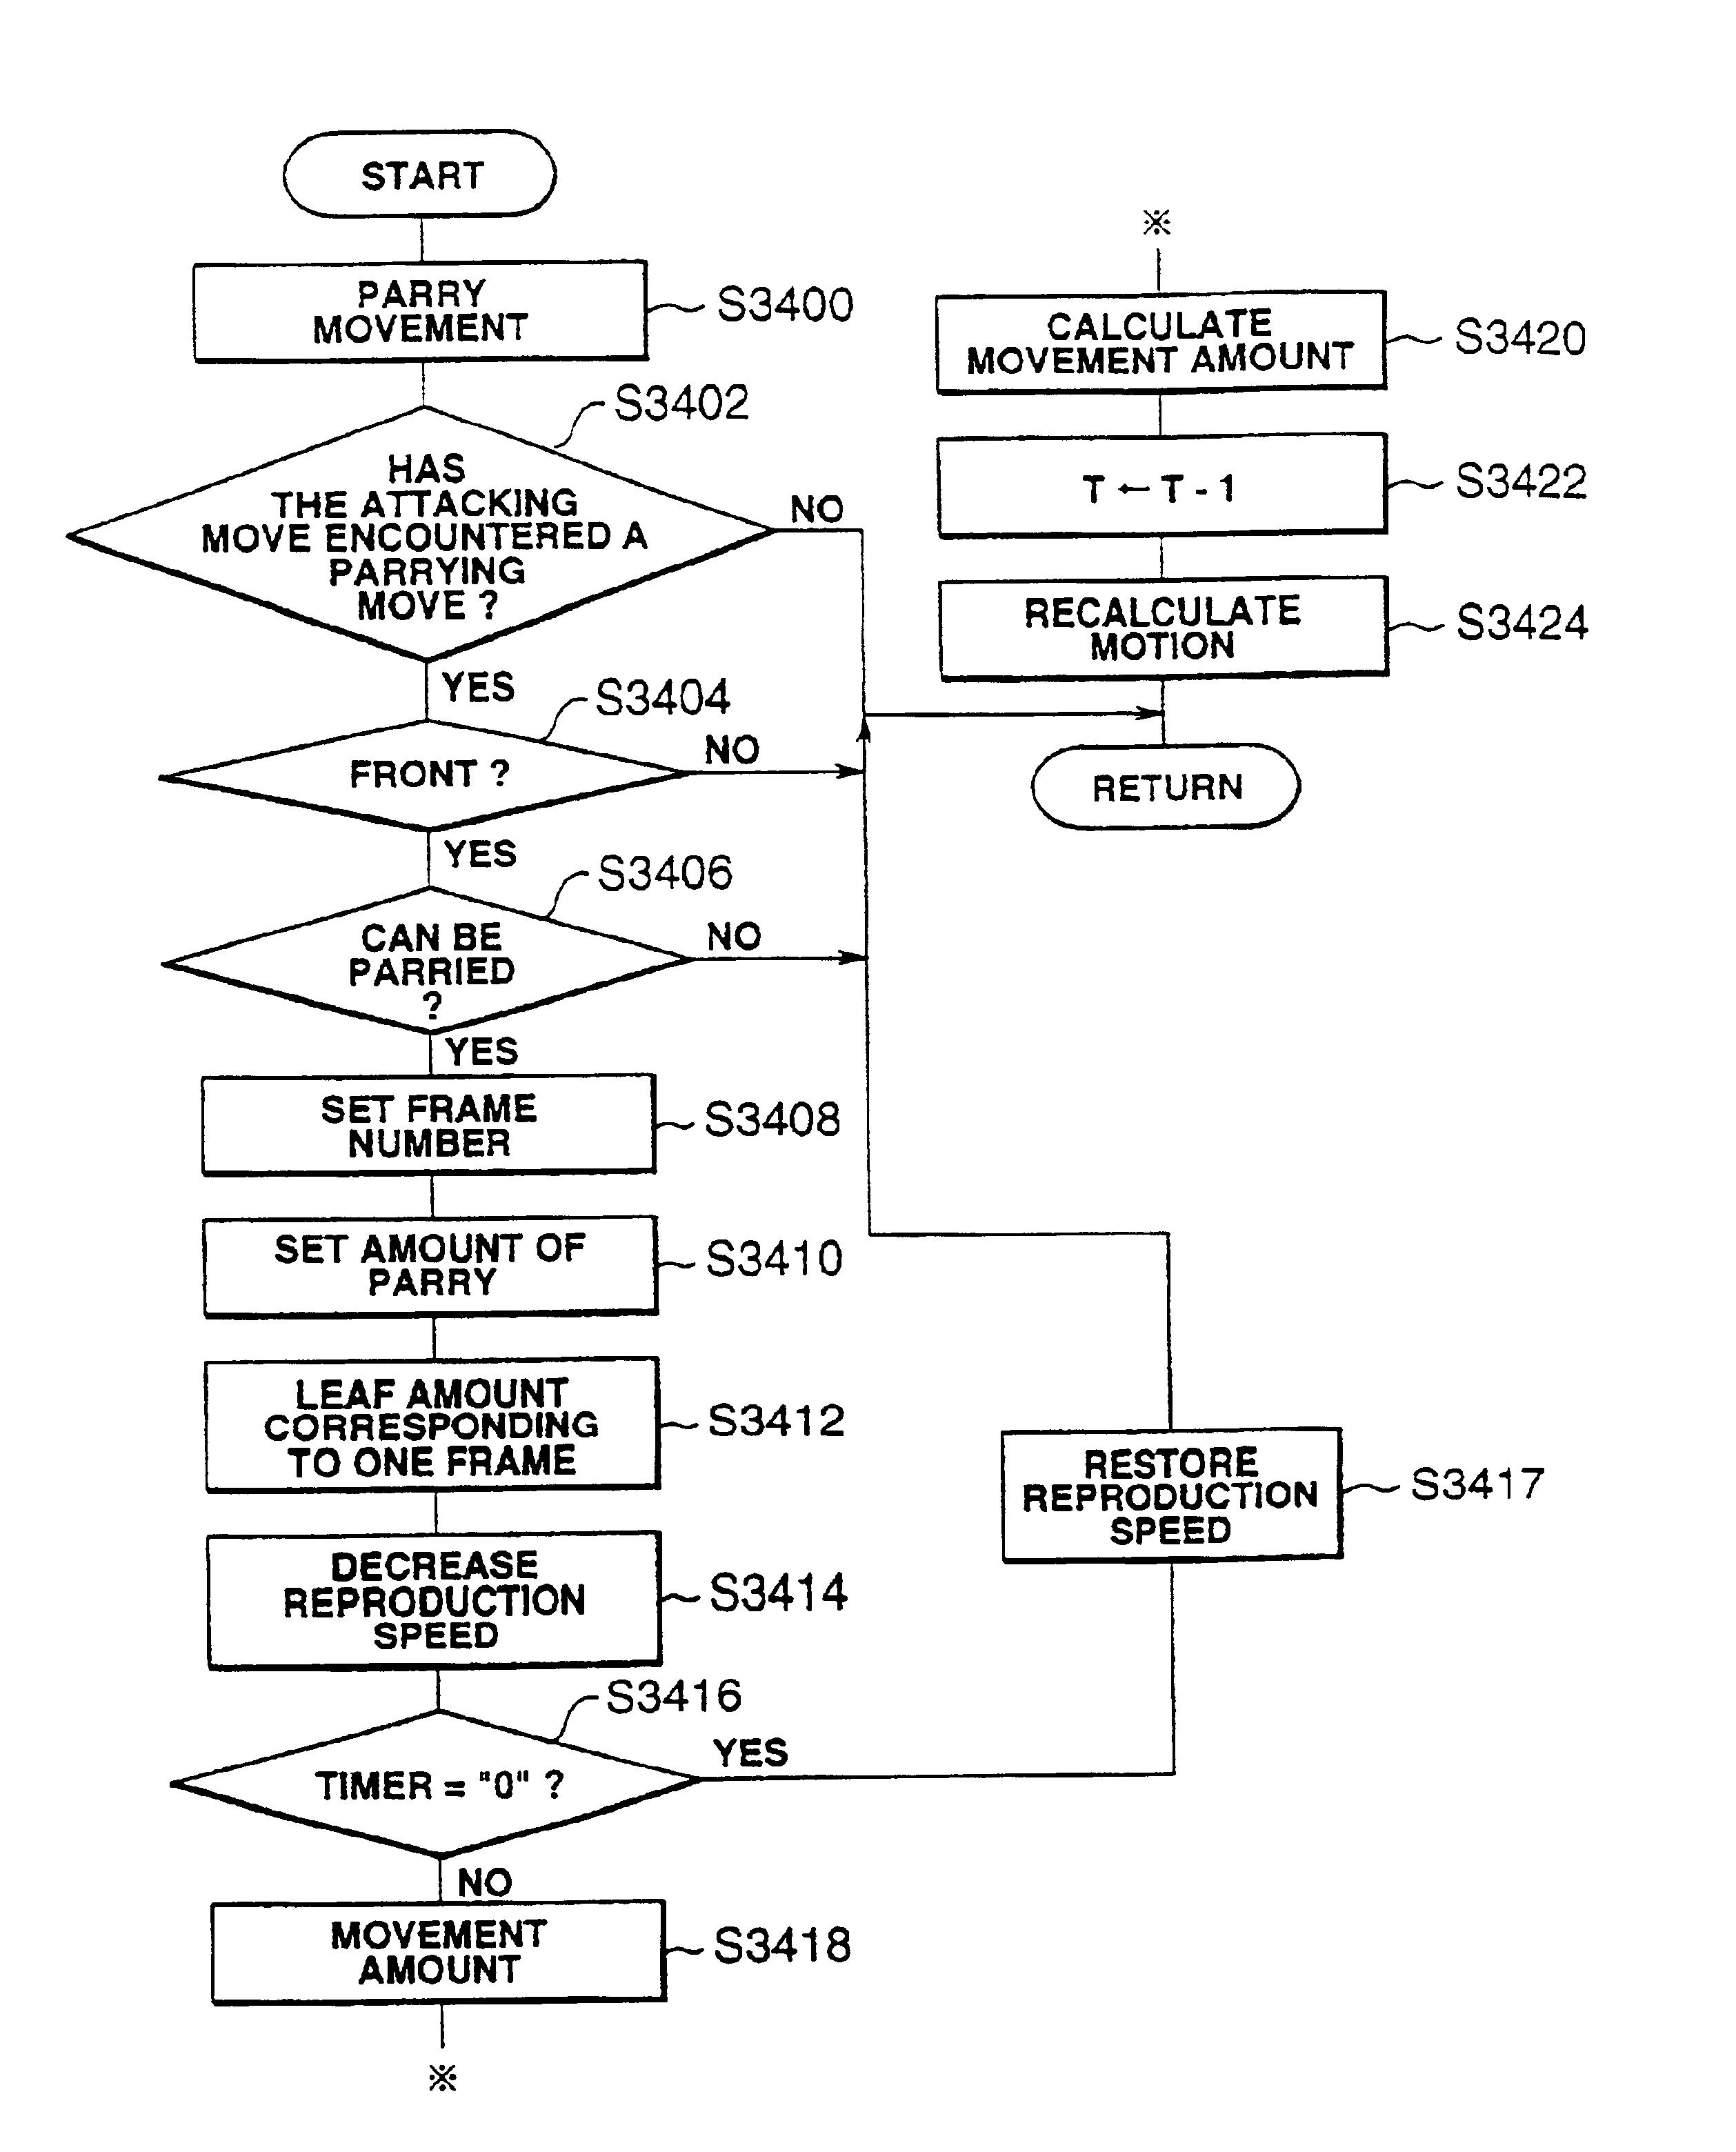 Image processing apparatus for a game, method and program for image processing for a game, and computer-readable medium